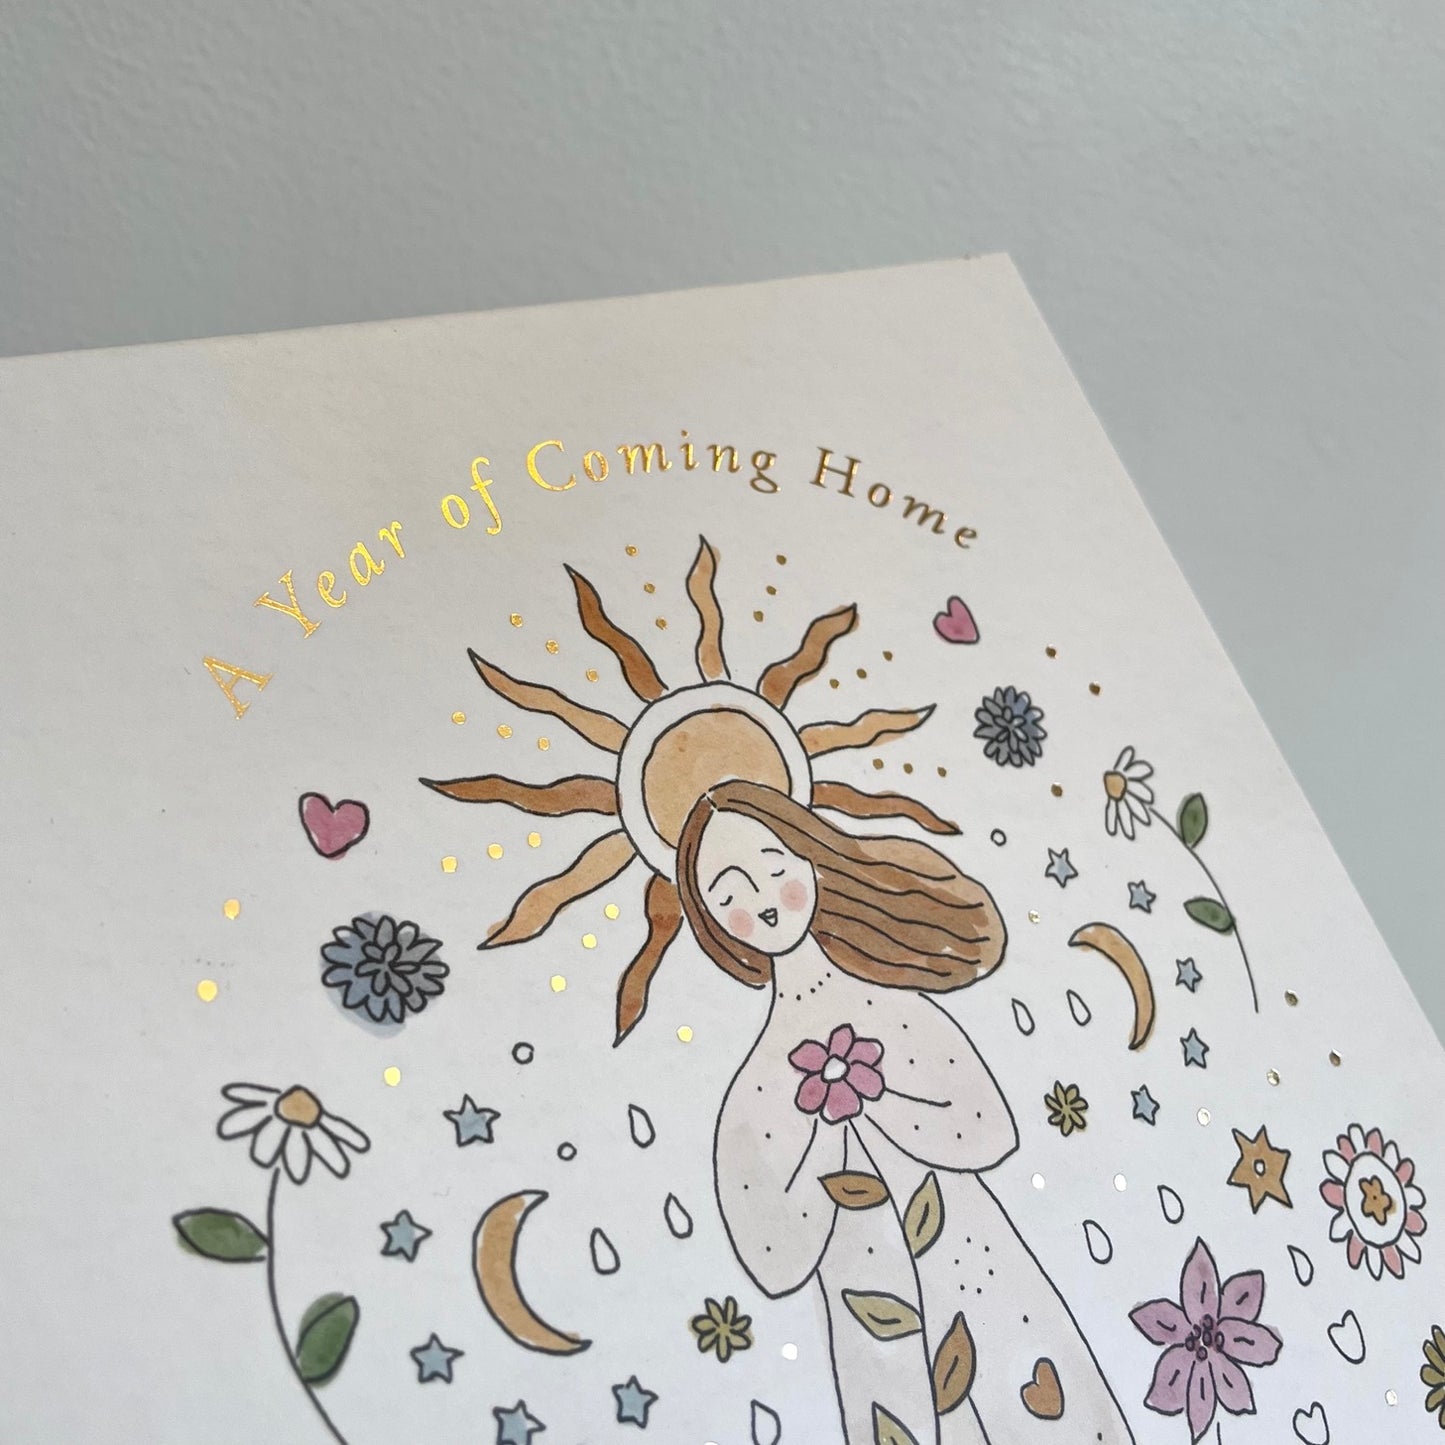 Musings from the Moon - 'A Year of Coming Home ' Guided Self-Love Journal